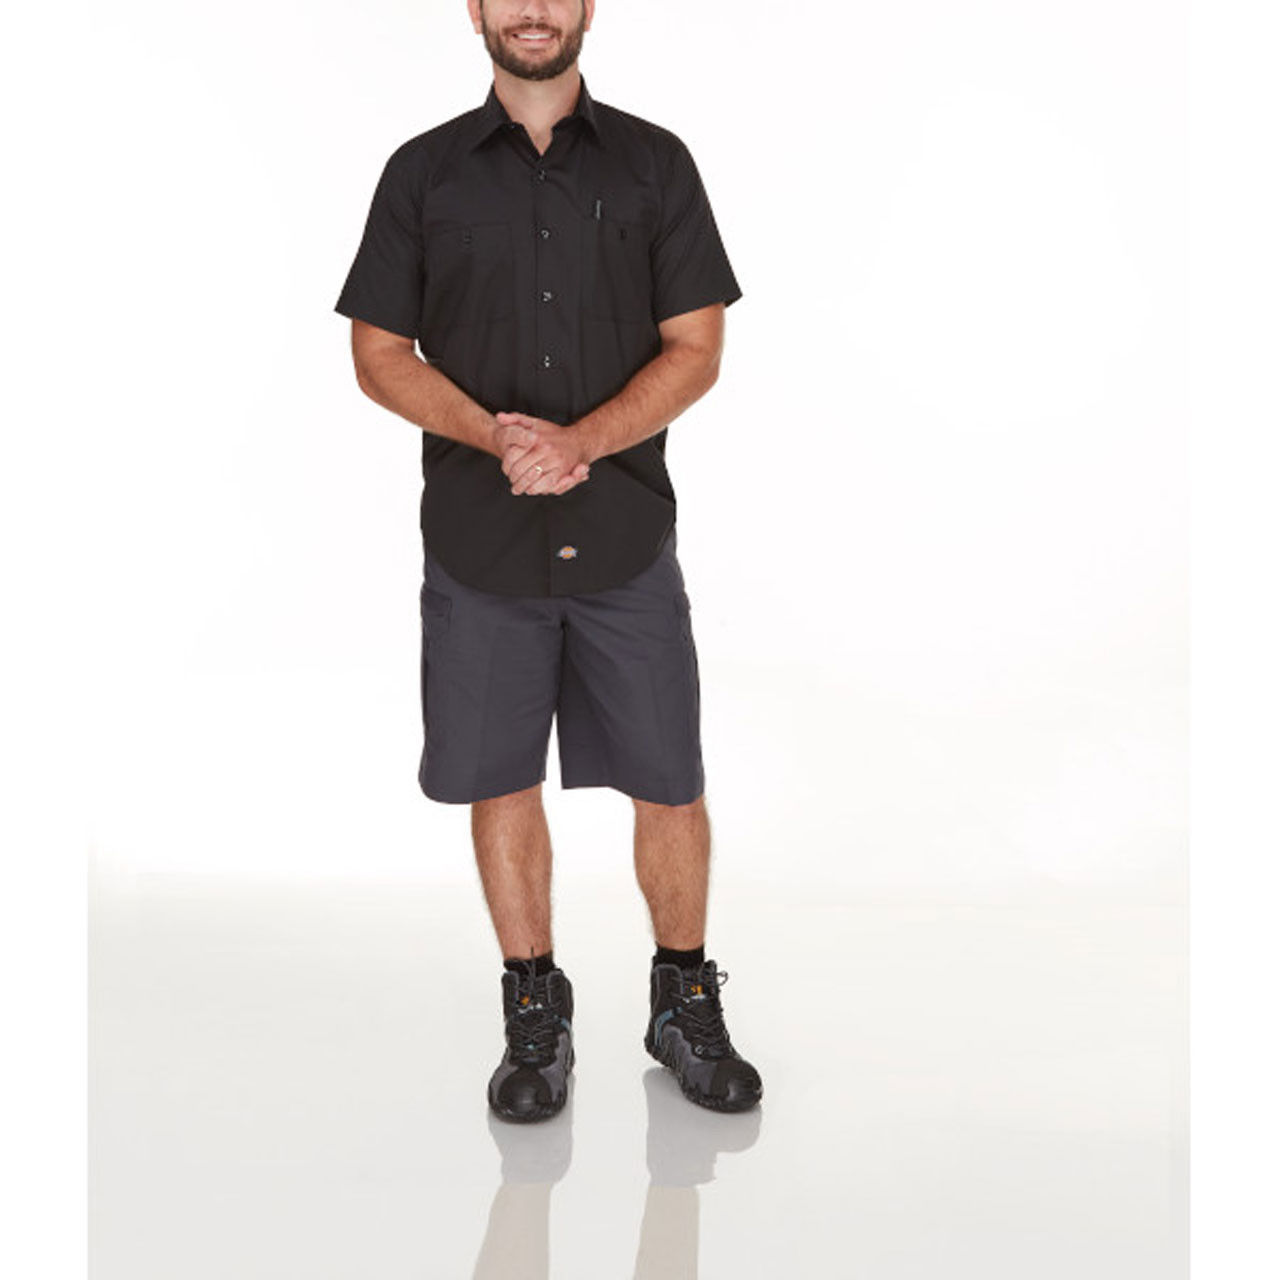 What advantages do the integrated evaporation zones in Dickies cooling work shirts provide?